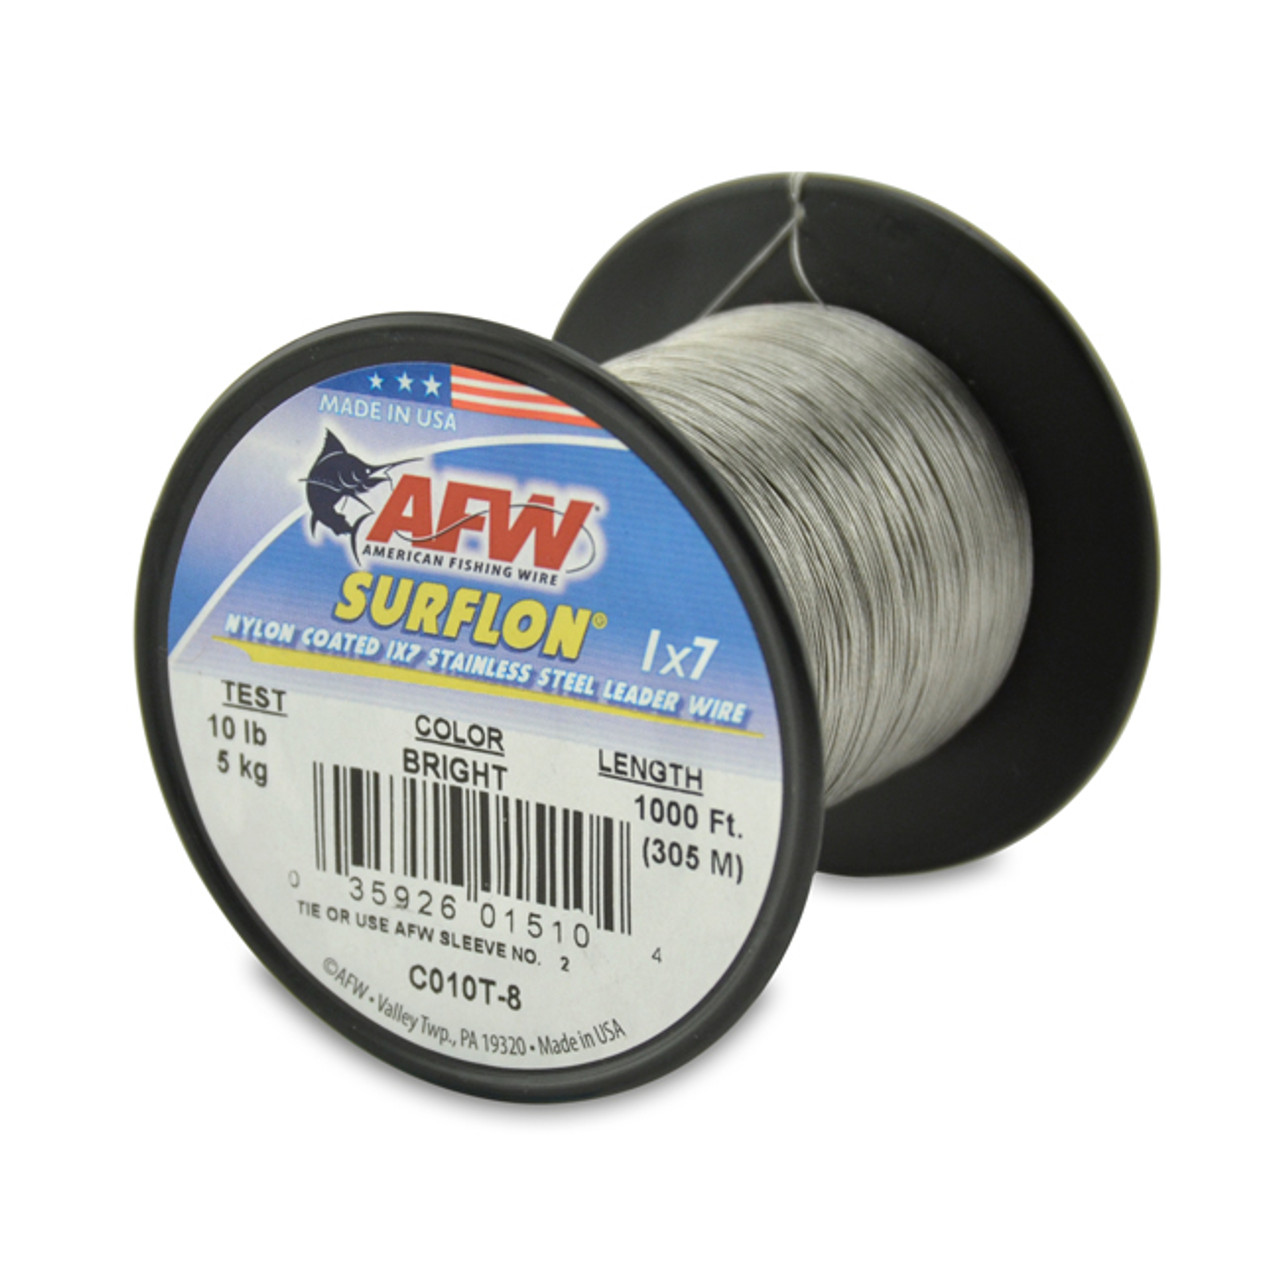 AFW - Surflon Nylon Coated 1x7 Stainless Steel Leader Wire - Bright - 1000 Feet - 10lb | Fish307.com